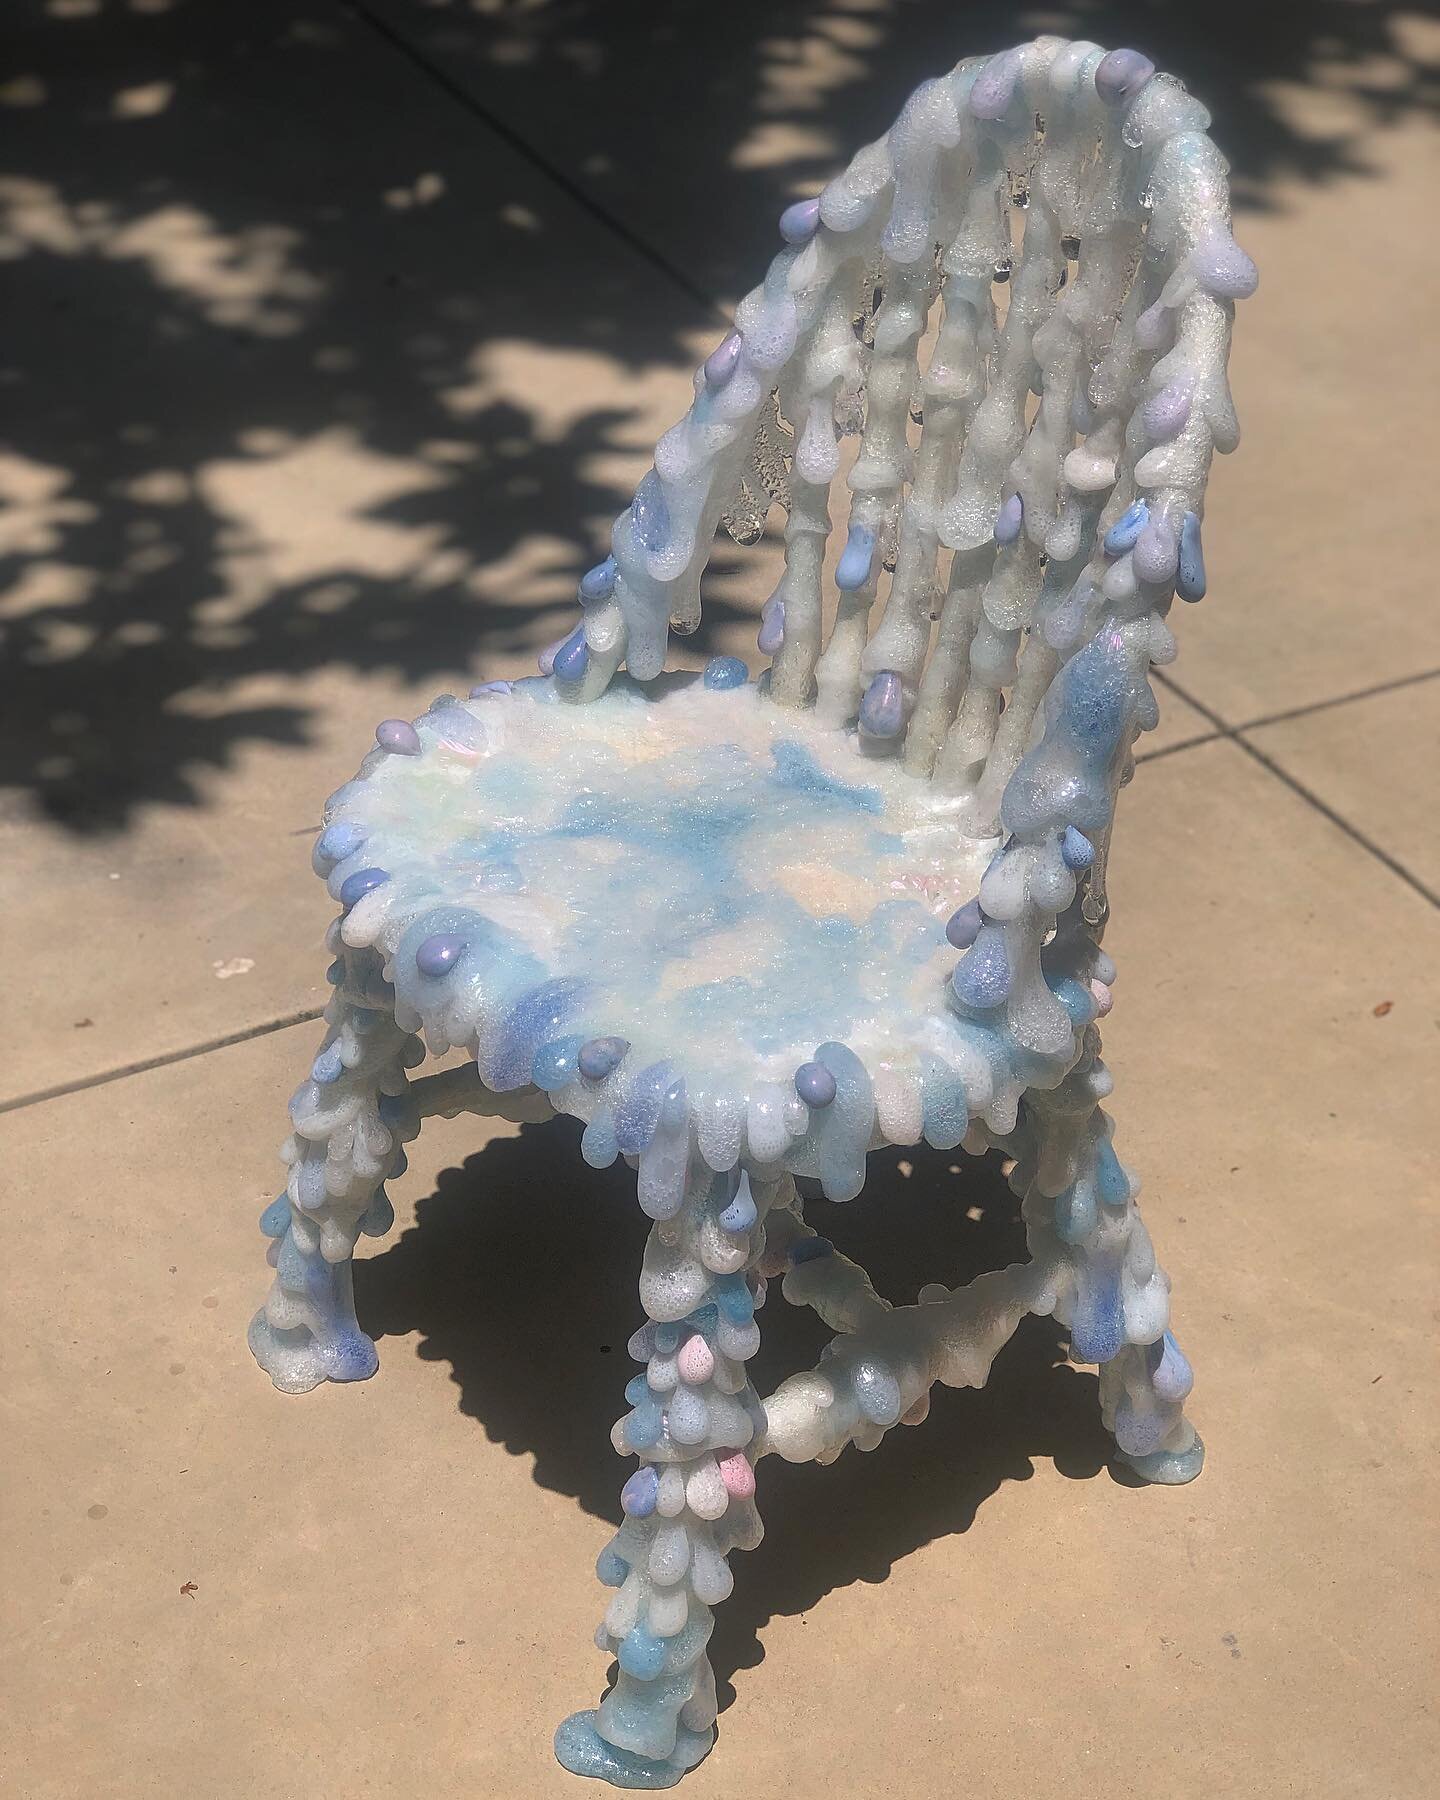 💧in progress chair💧
19 x 36 x 19&rdquo;
acrylic, oil, ink, resin, mica pigment, wax, found armature